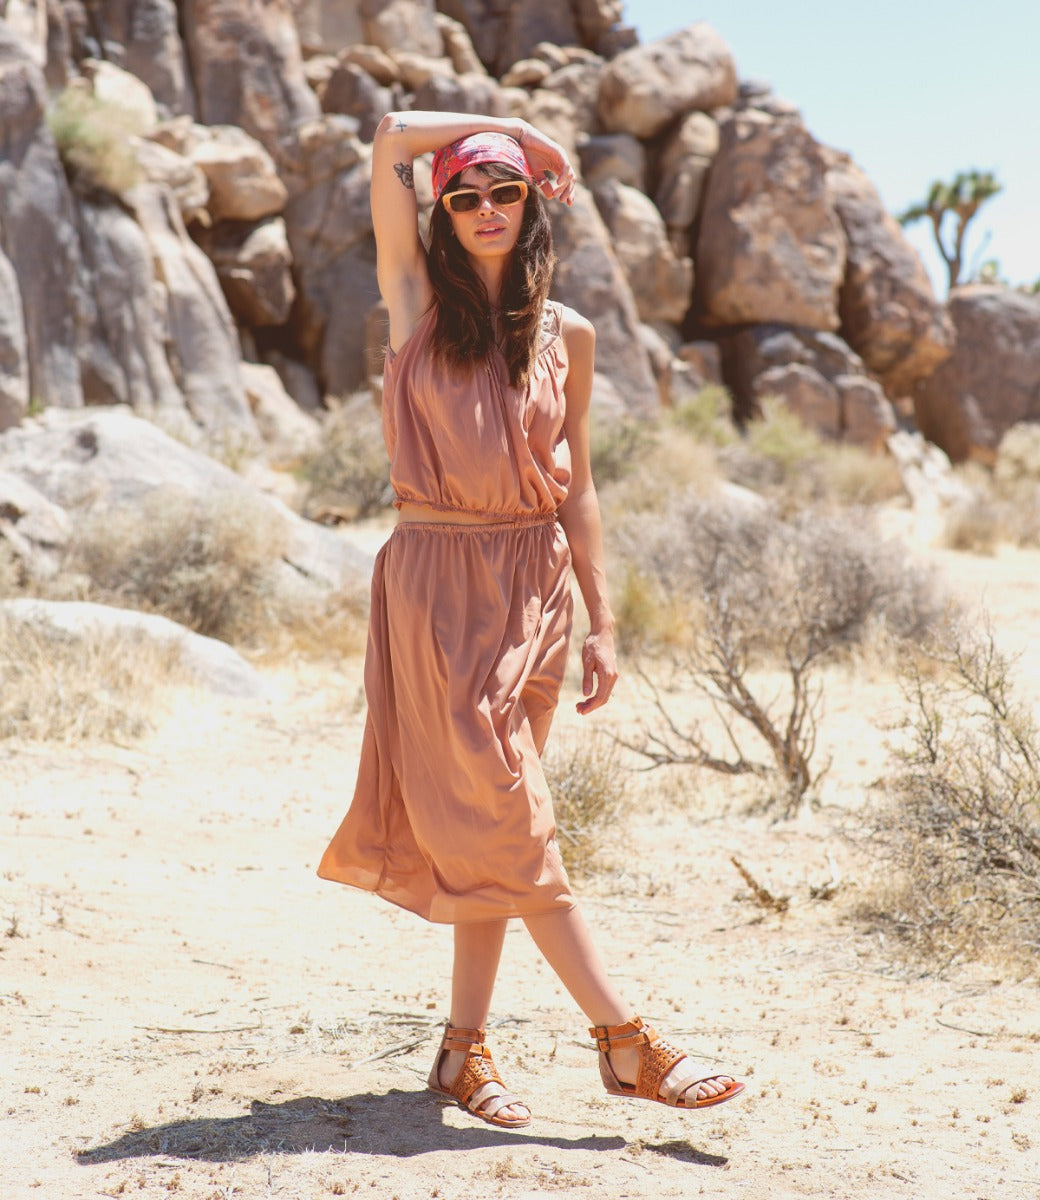 A woman in a tan dress standing in the desert wearing Capriana shoes by Bed Stu.